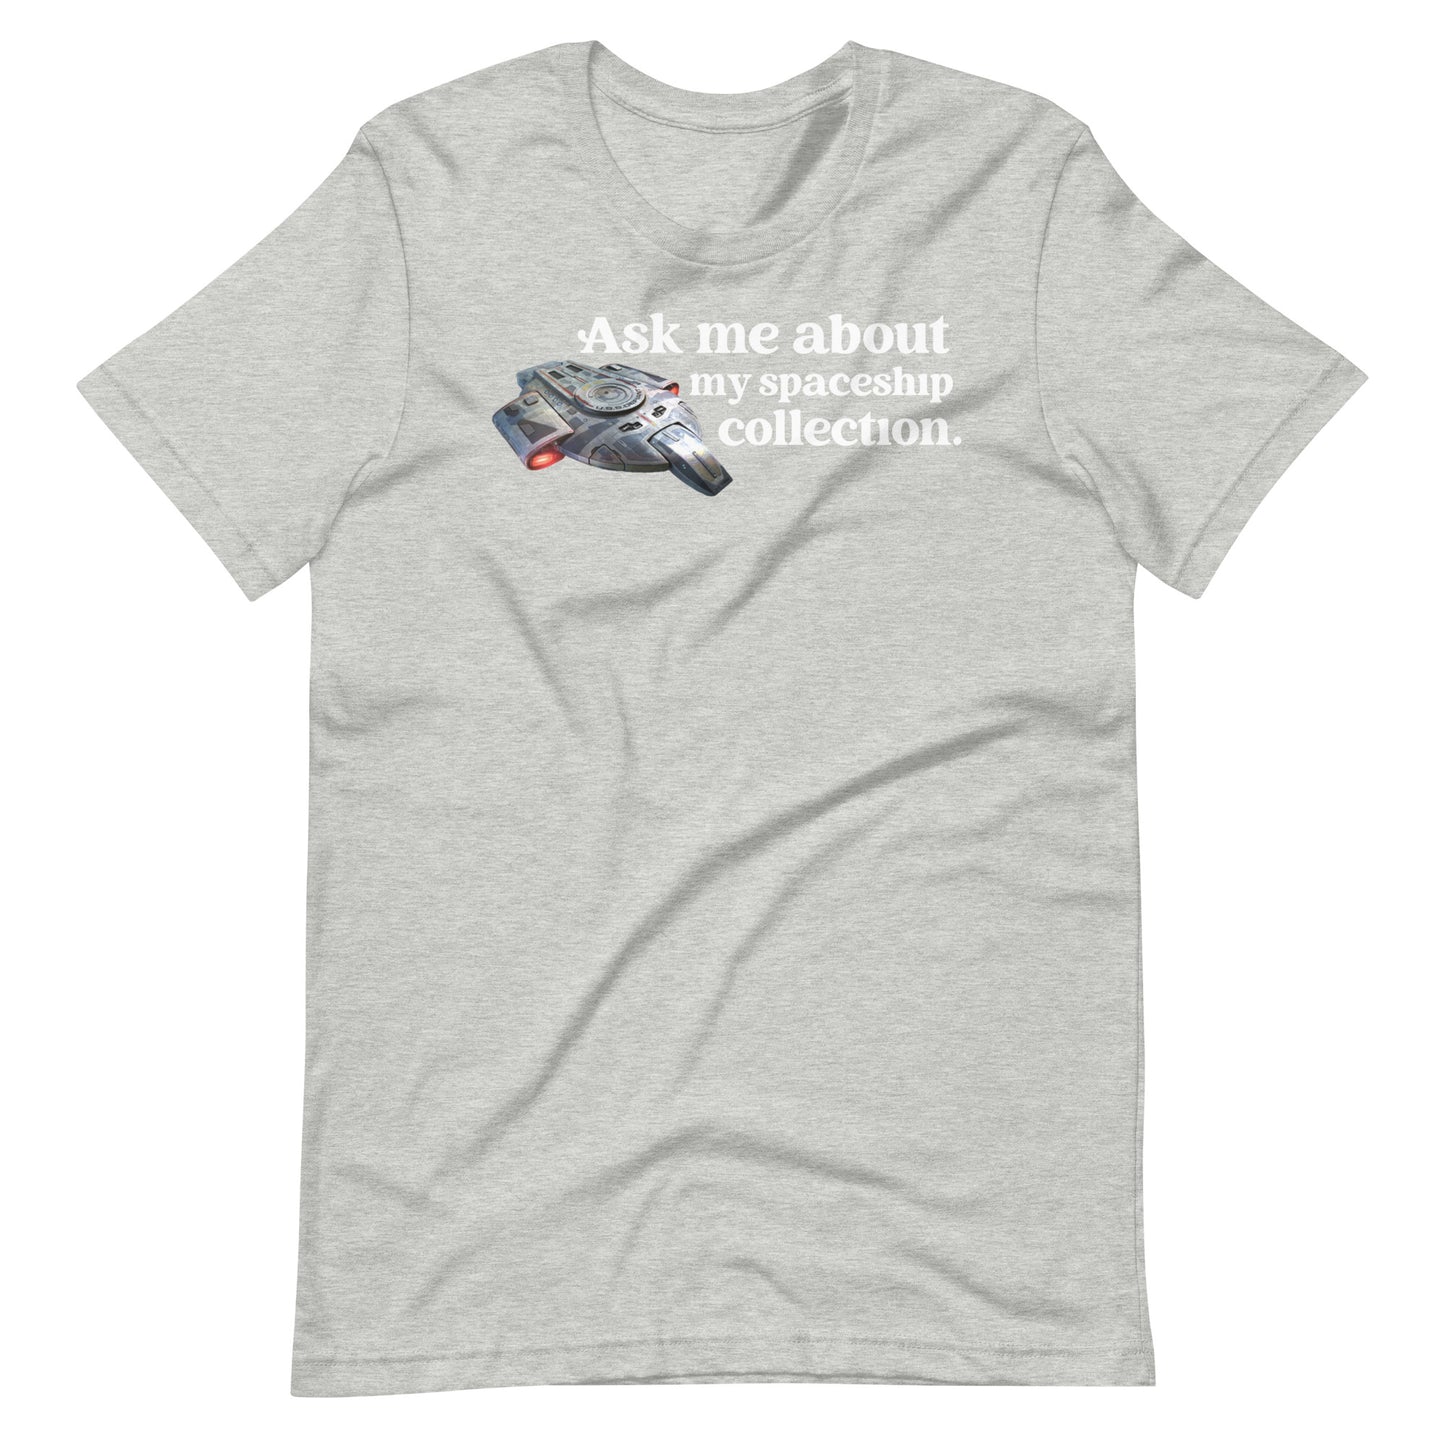 Ask Me About My Spaceship Collection Short Sleeve Unisex t-shirt